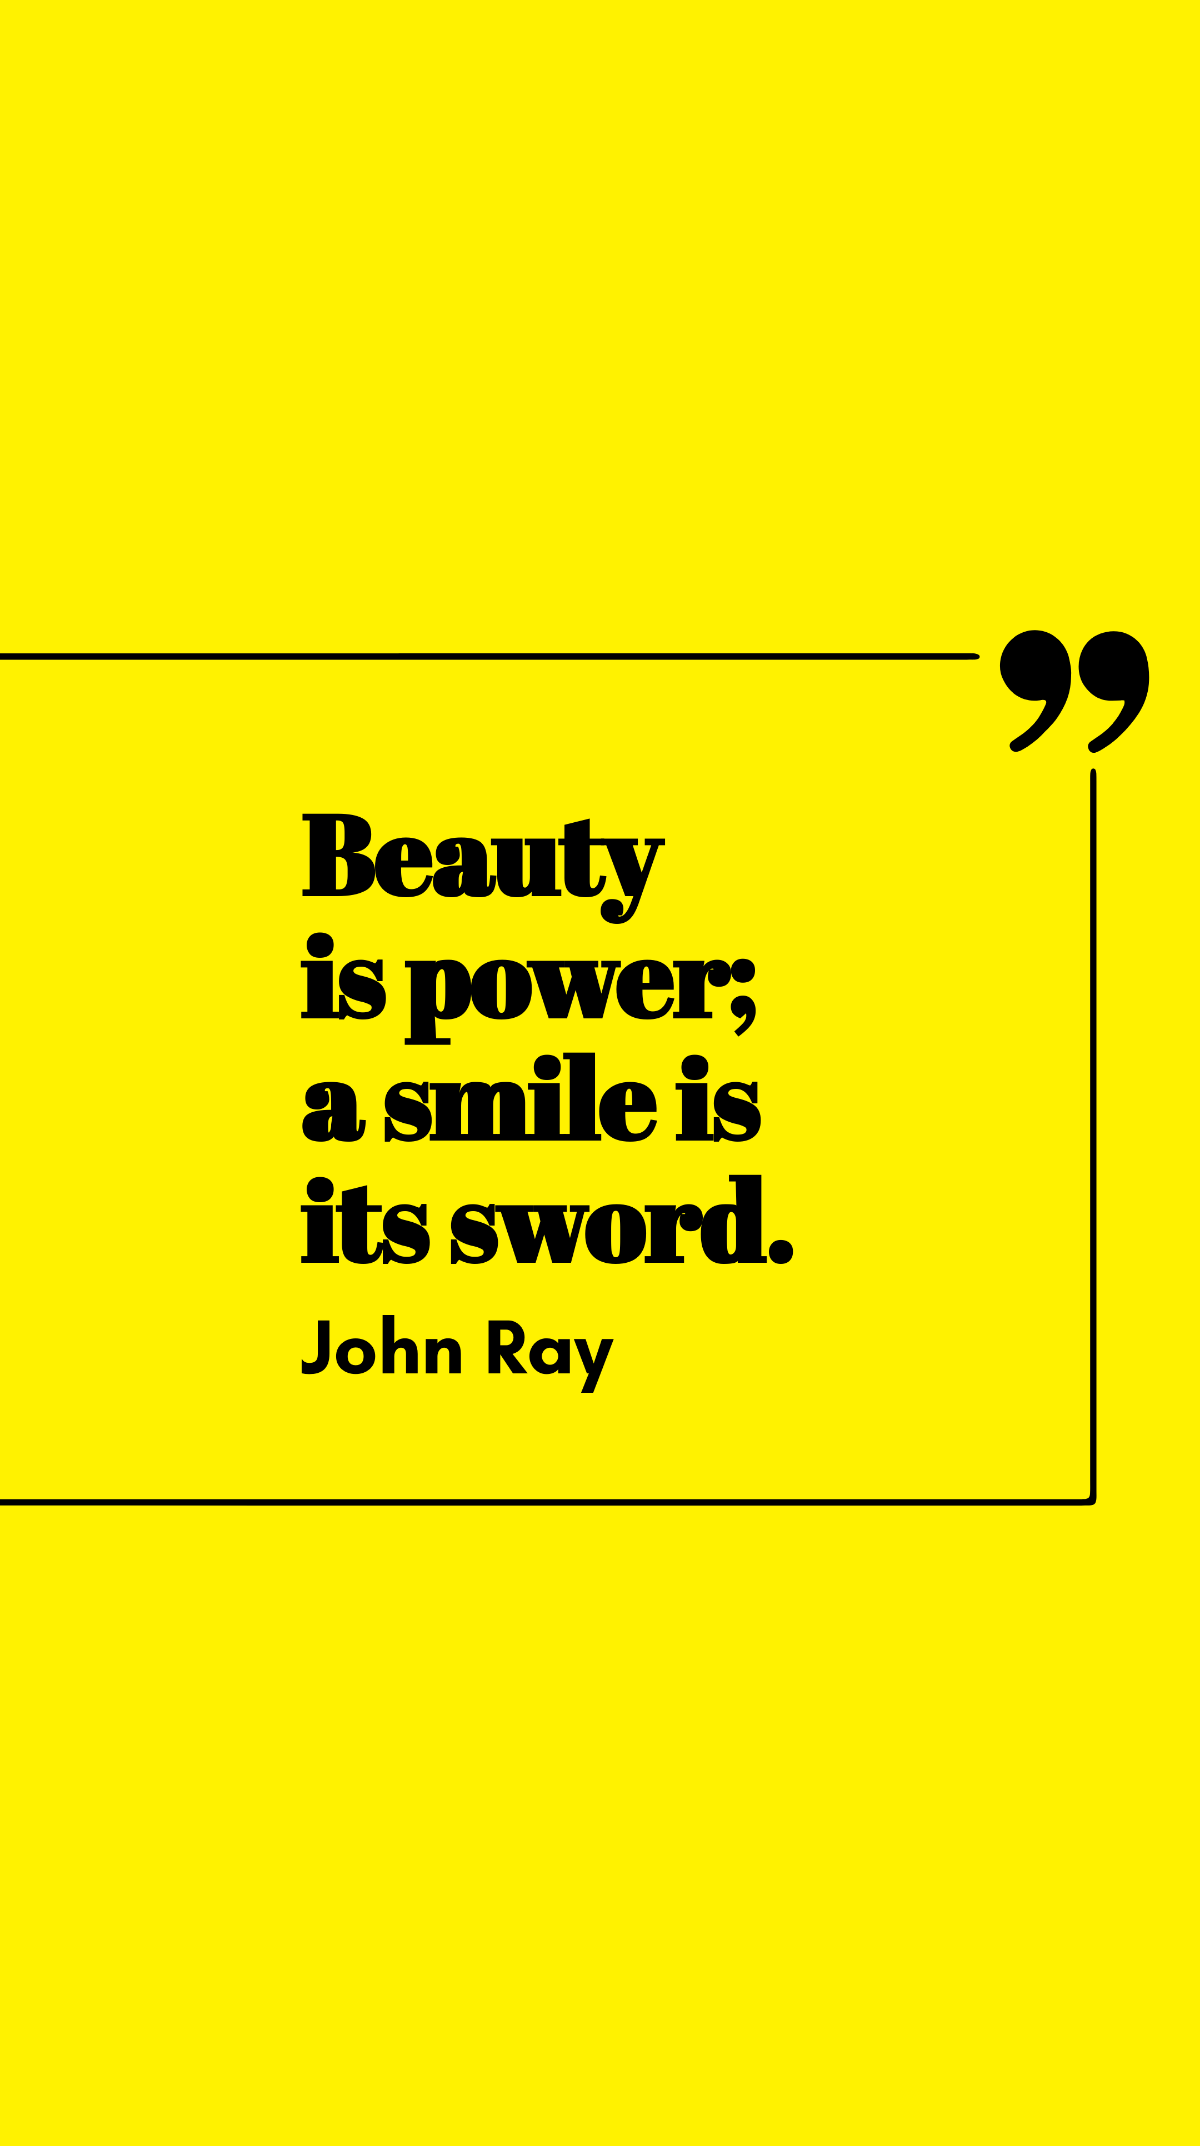 John Ray - Beauty is power; a smile is its sword. Template